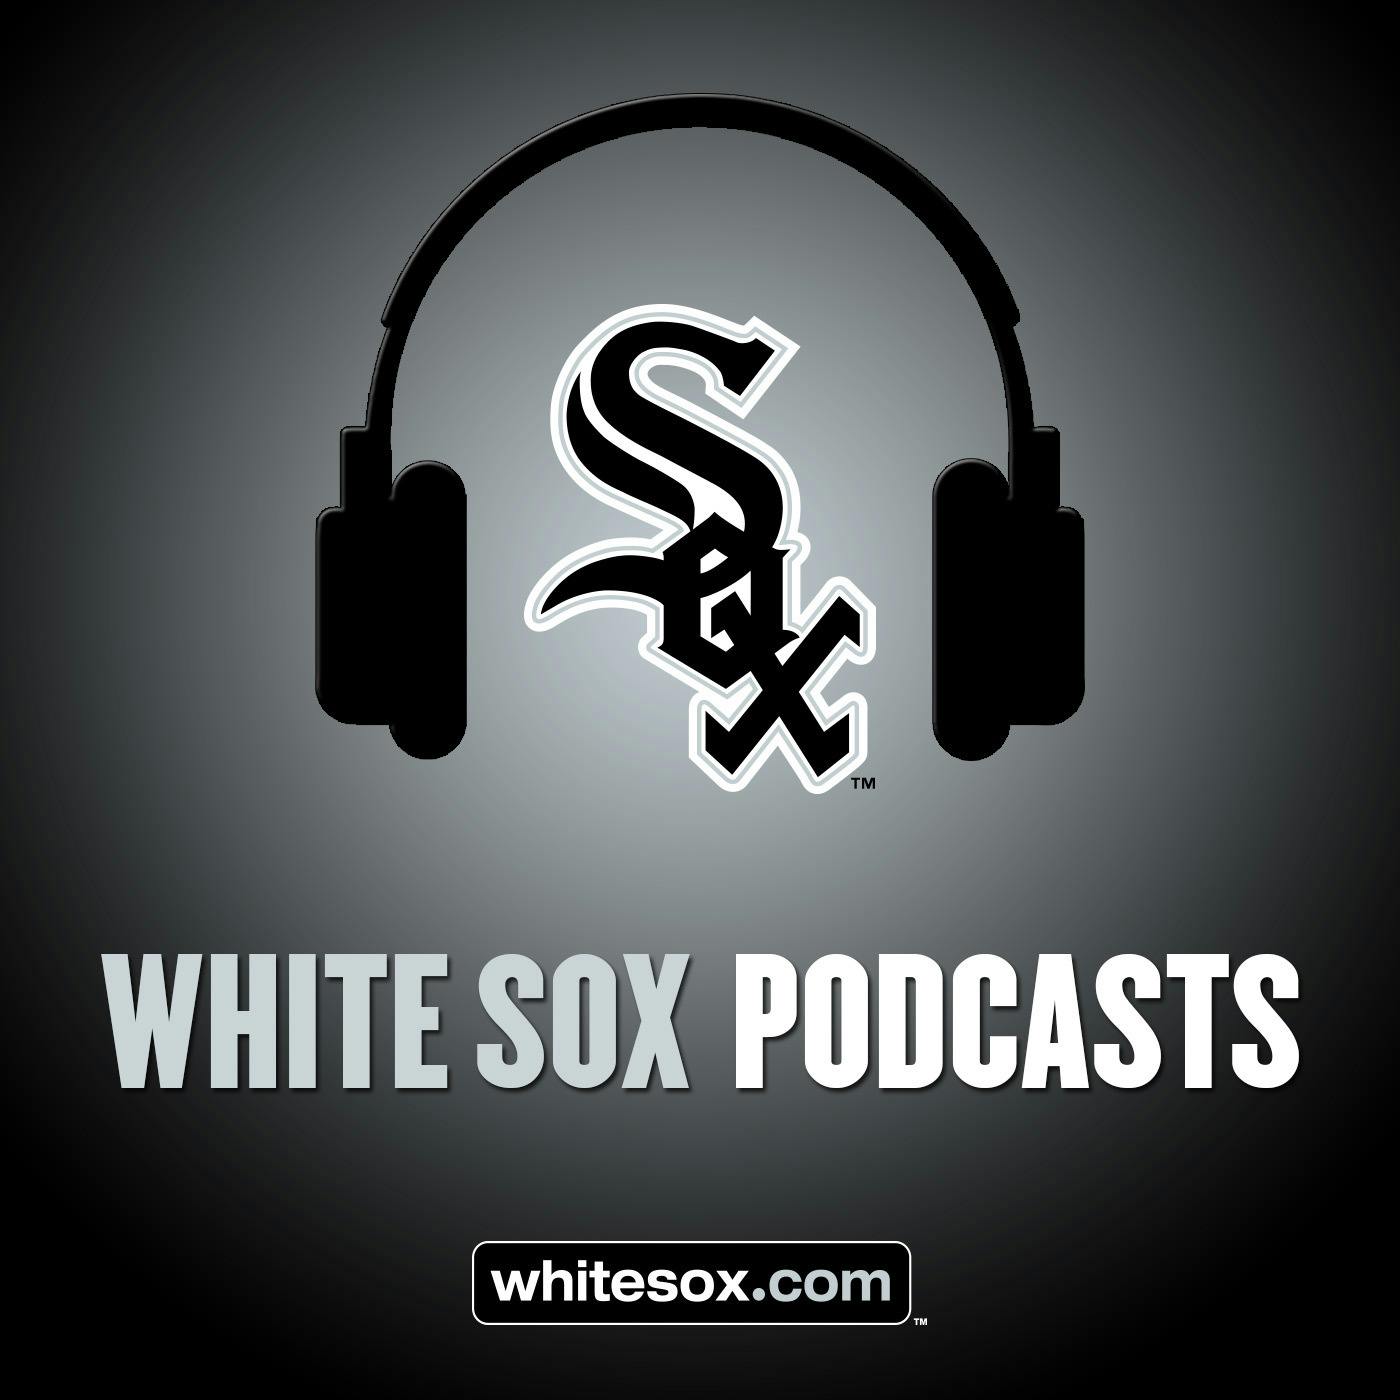 11/26/17: White Sox Weekly